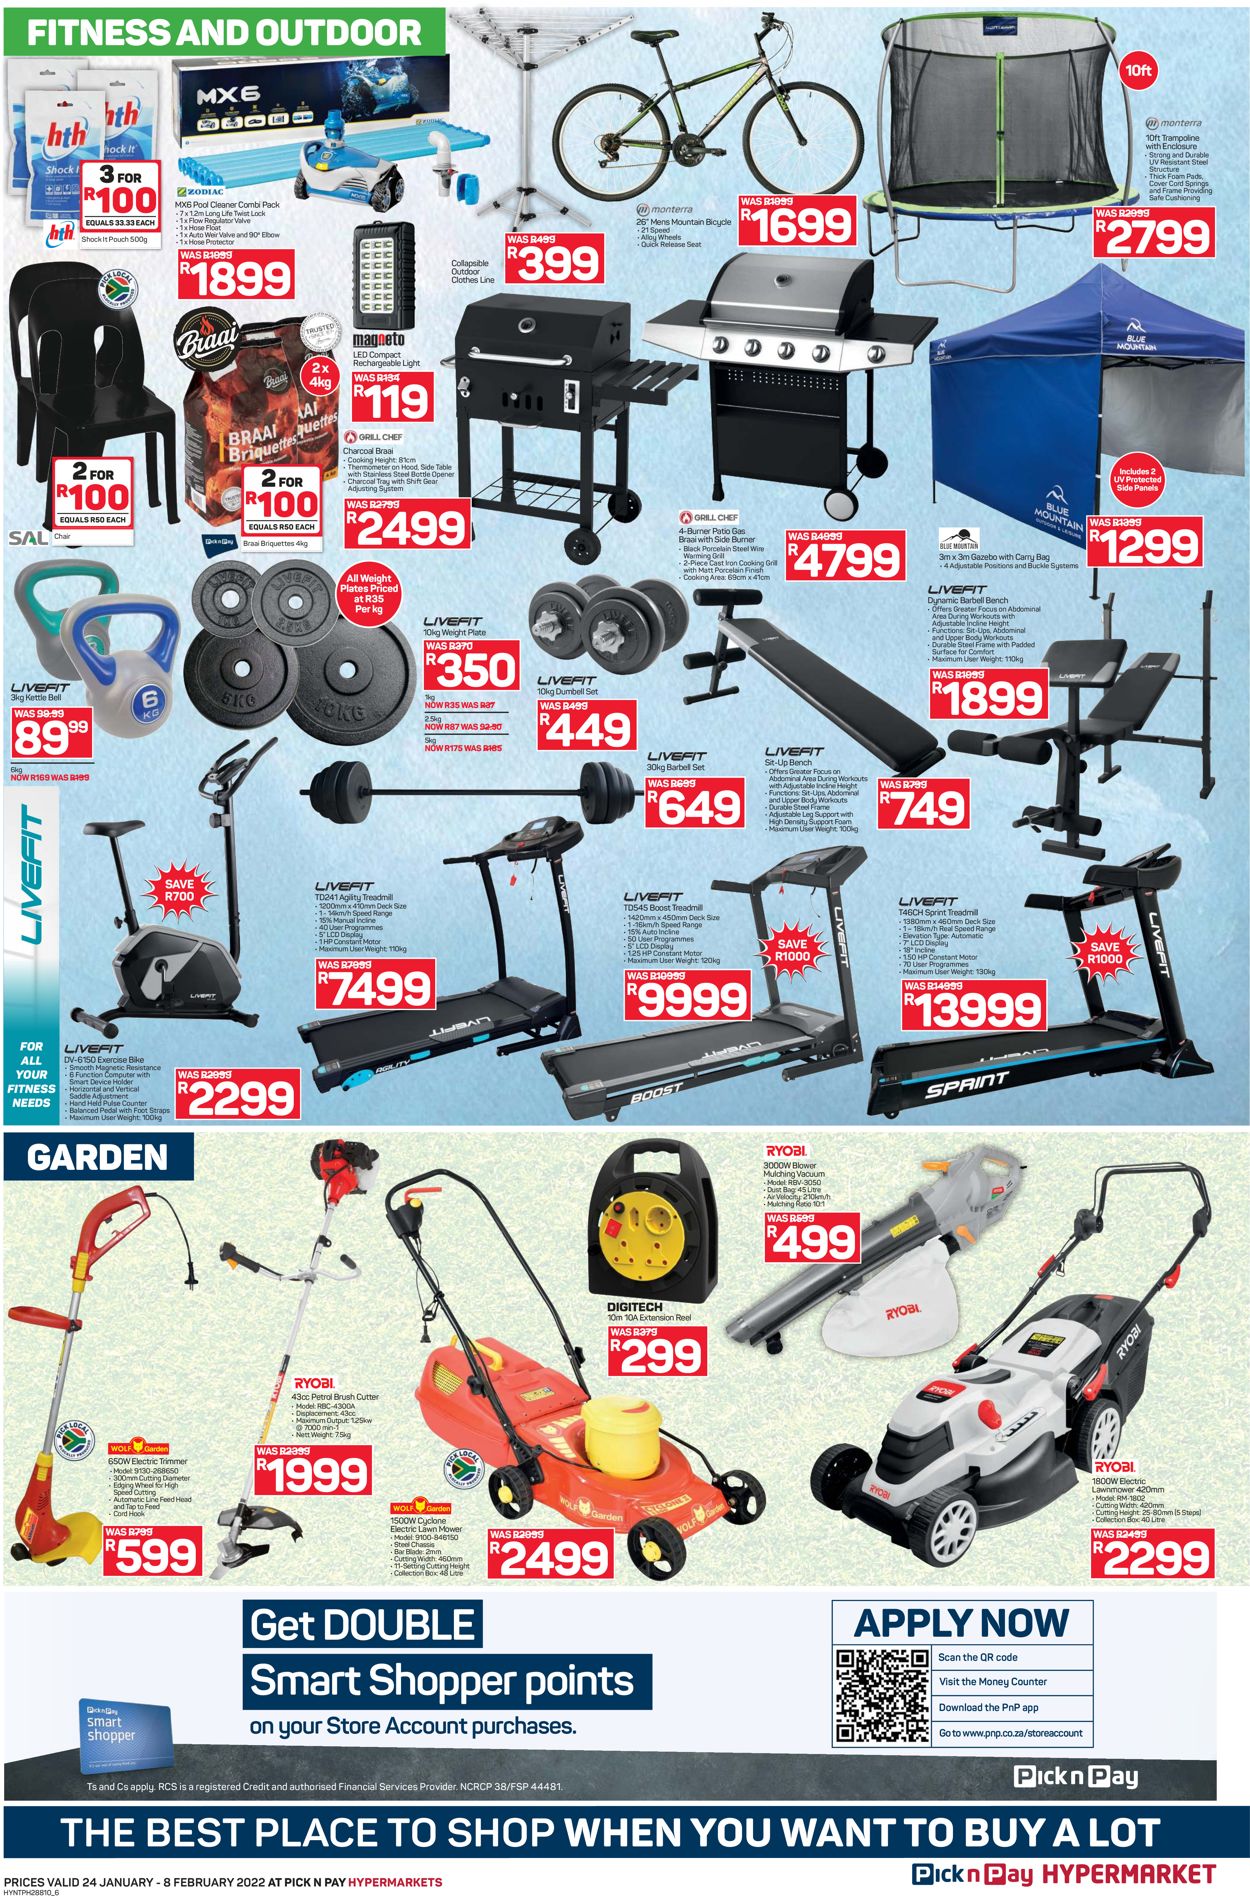 Pick n Pay Catalogue - 2022/01/24-2022/02/08 (Page 6)